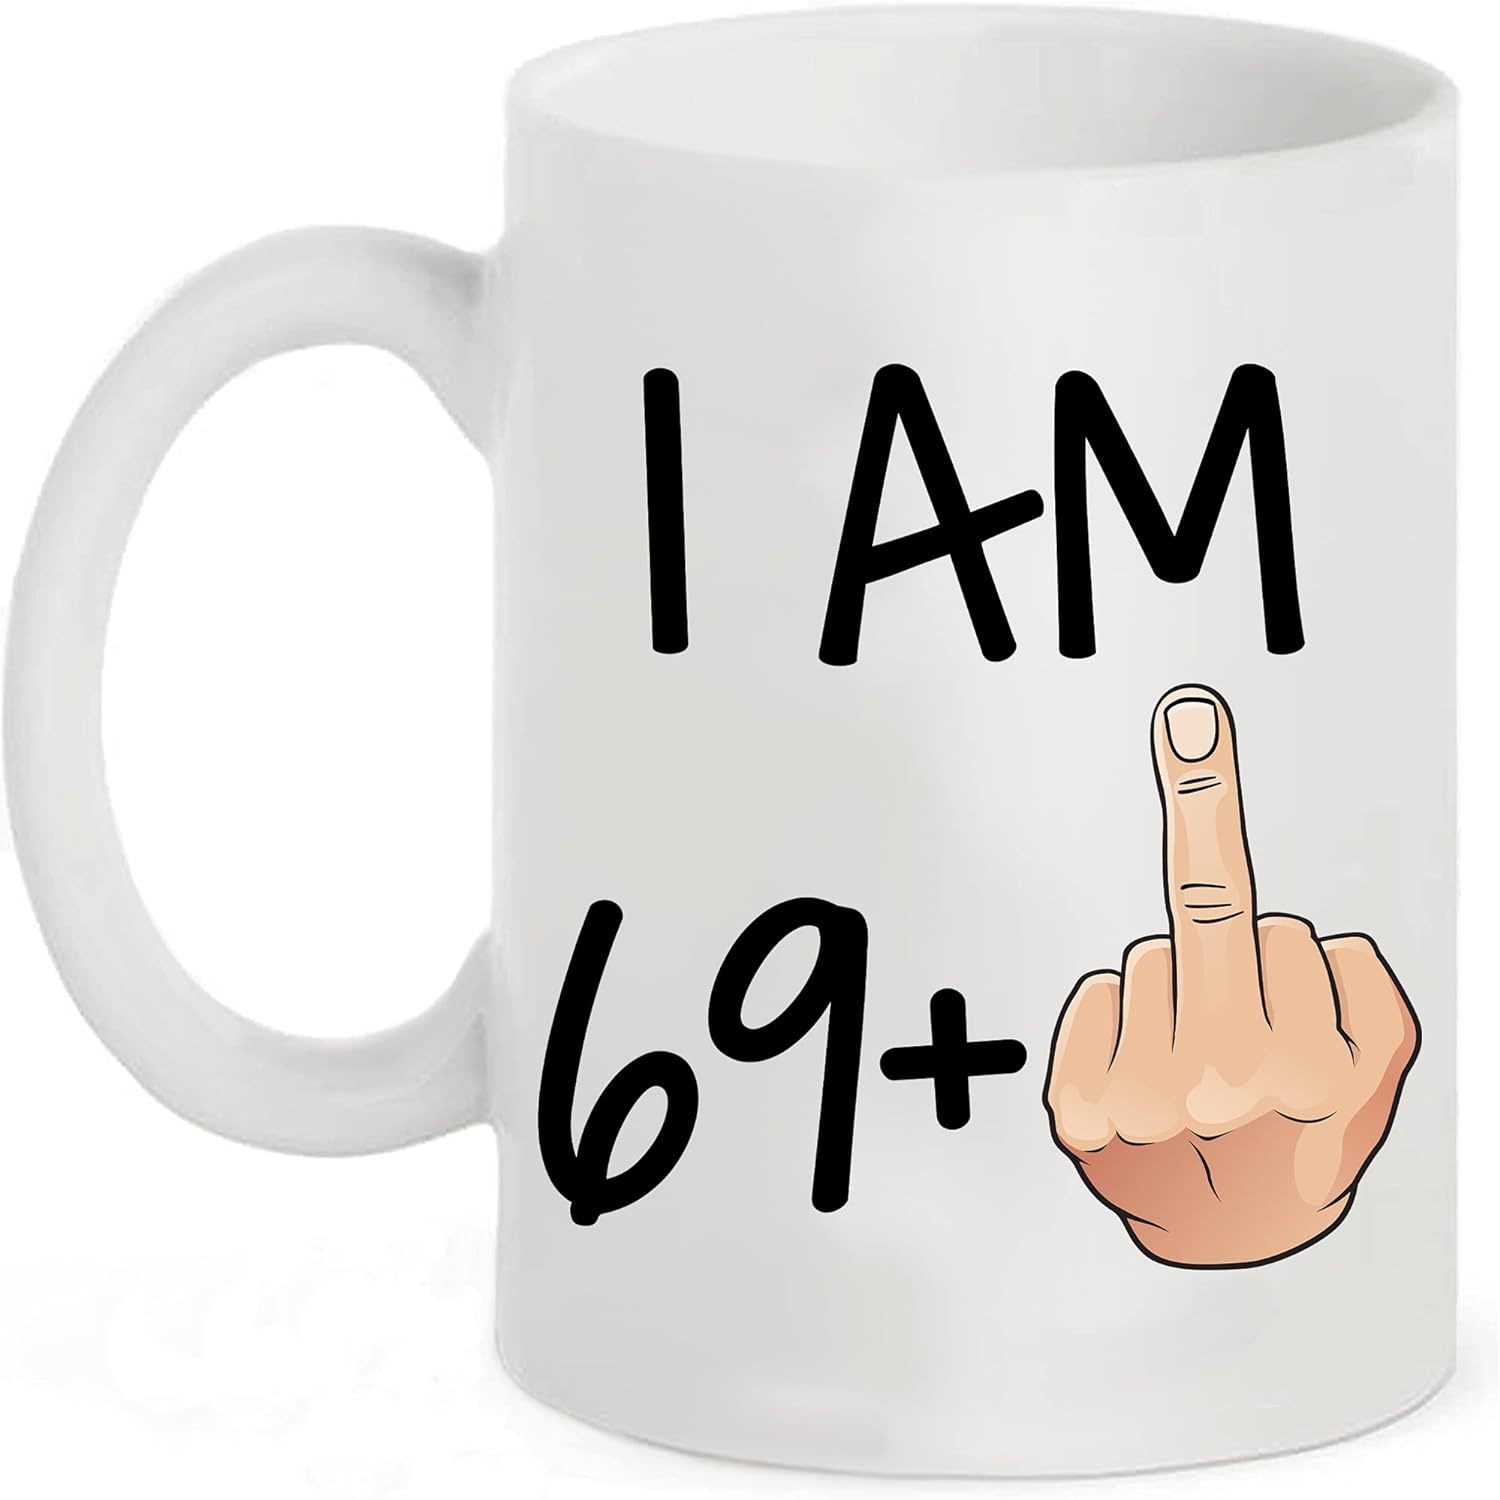 Funny 70th Birthday Gift idea, 11 oz Coffee Mug for Men and Women Turning 70 Years Old as a Joke Birthday Celebration Cup, Dishwasher and Microwave friendly. Best Gift for Mum, dad, Teacher or anyone